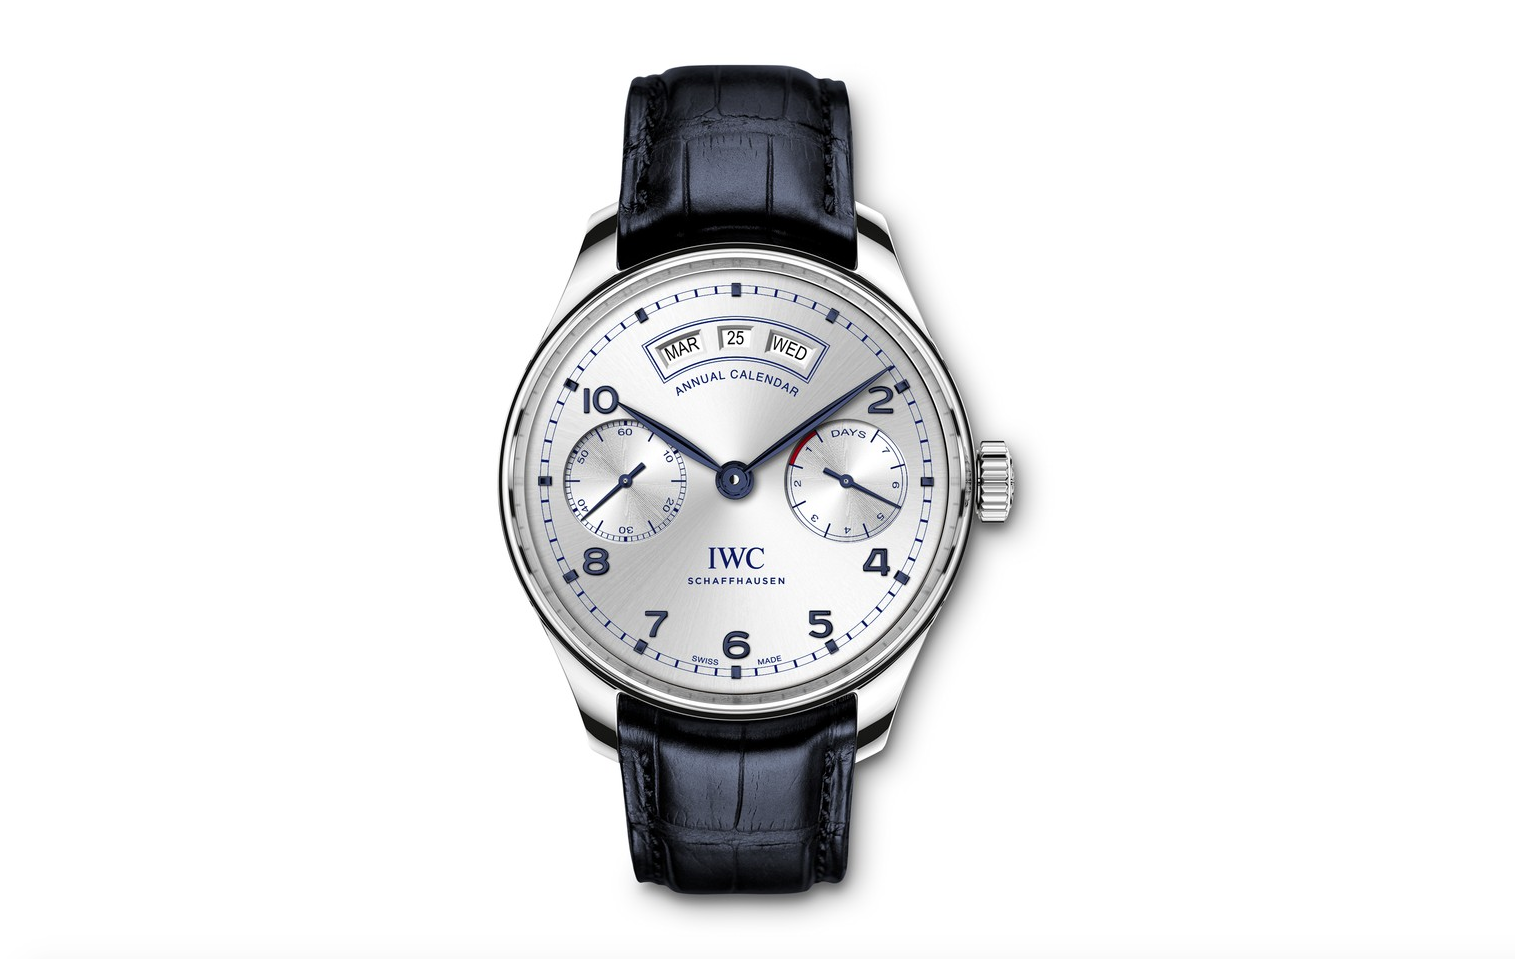 IWC Partners With The BFI Film Festival For An Online Charity Auction